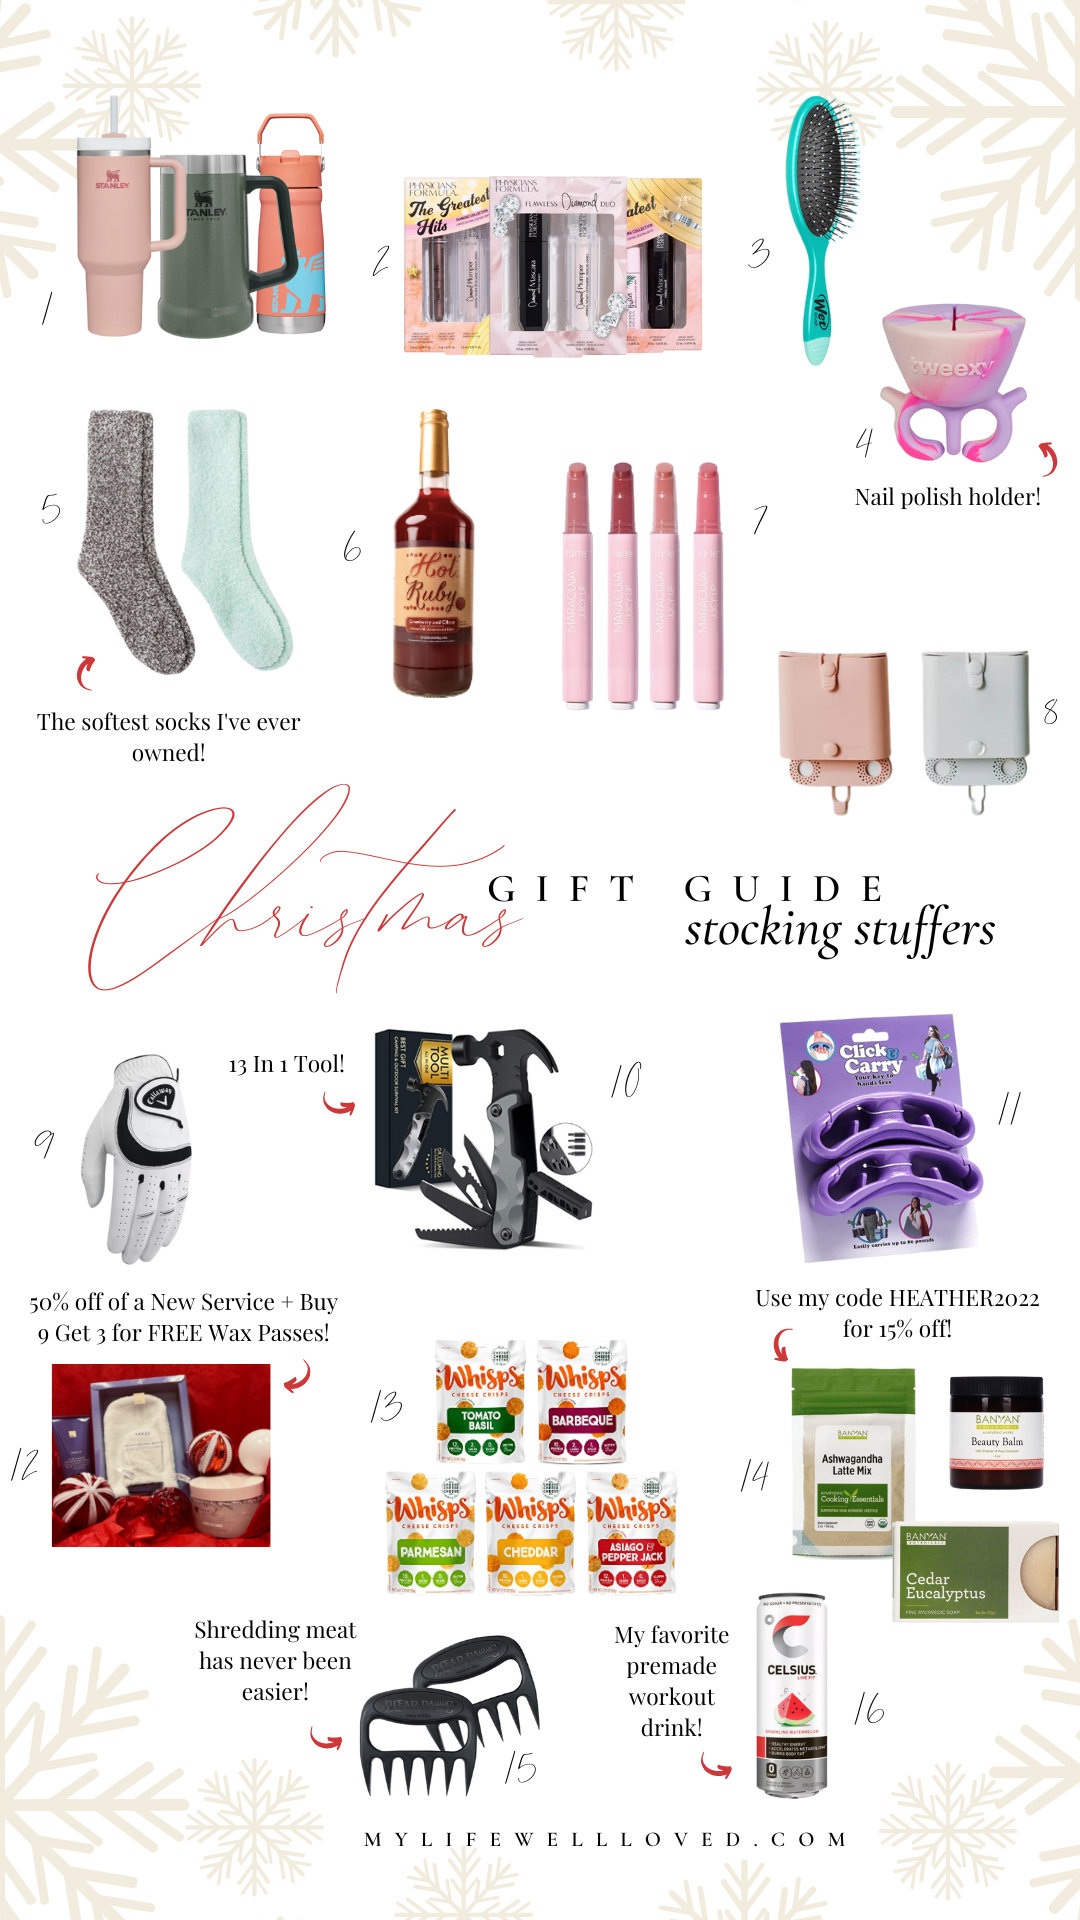 Holiday Shopping: 16 Christmas Stocking Stuffers For Everyone On Your List